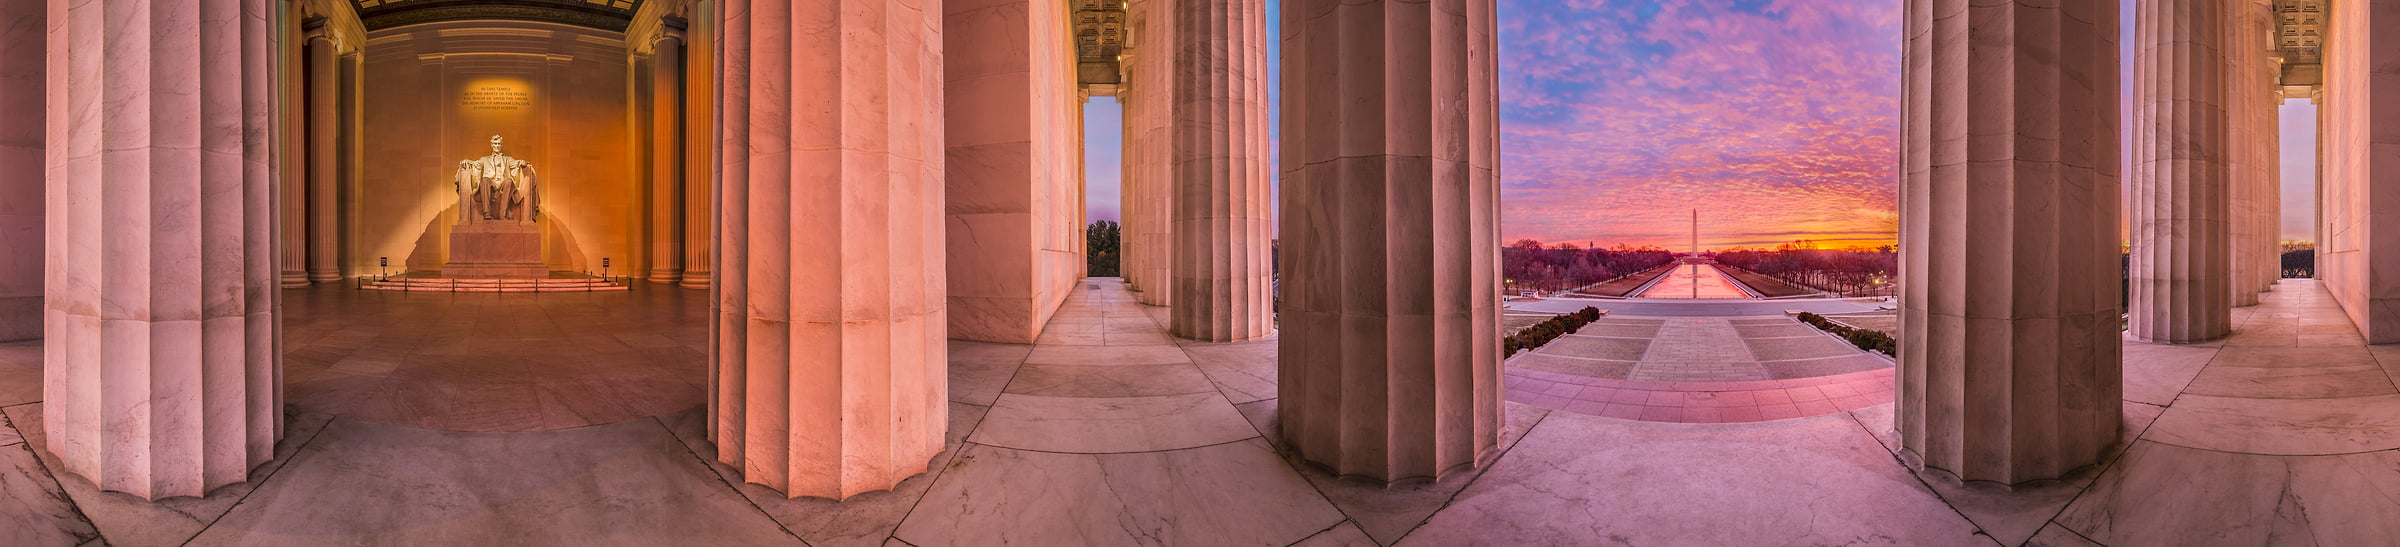 214 megapixels! A very high resolution, large-format VAST photo of the Lincoln Memorial and the National Mall at sunrise; 360-degree panorama photograph created by Tim Lo Monaco in Washington, D.C.